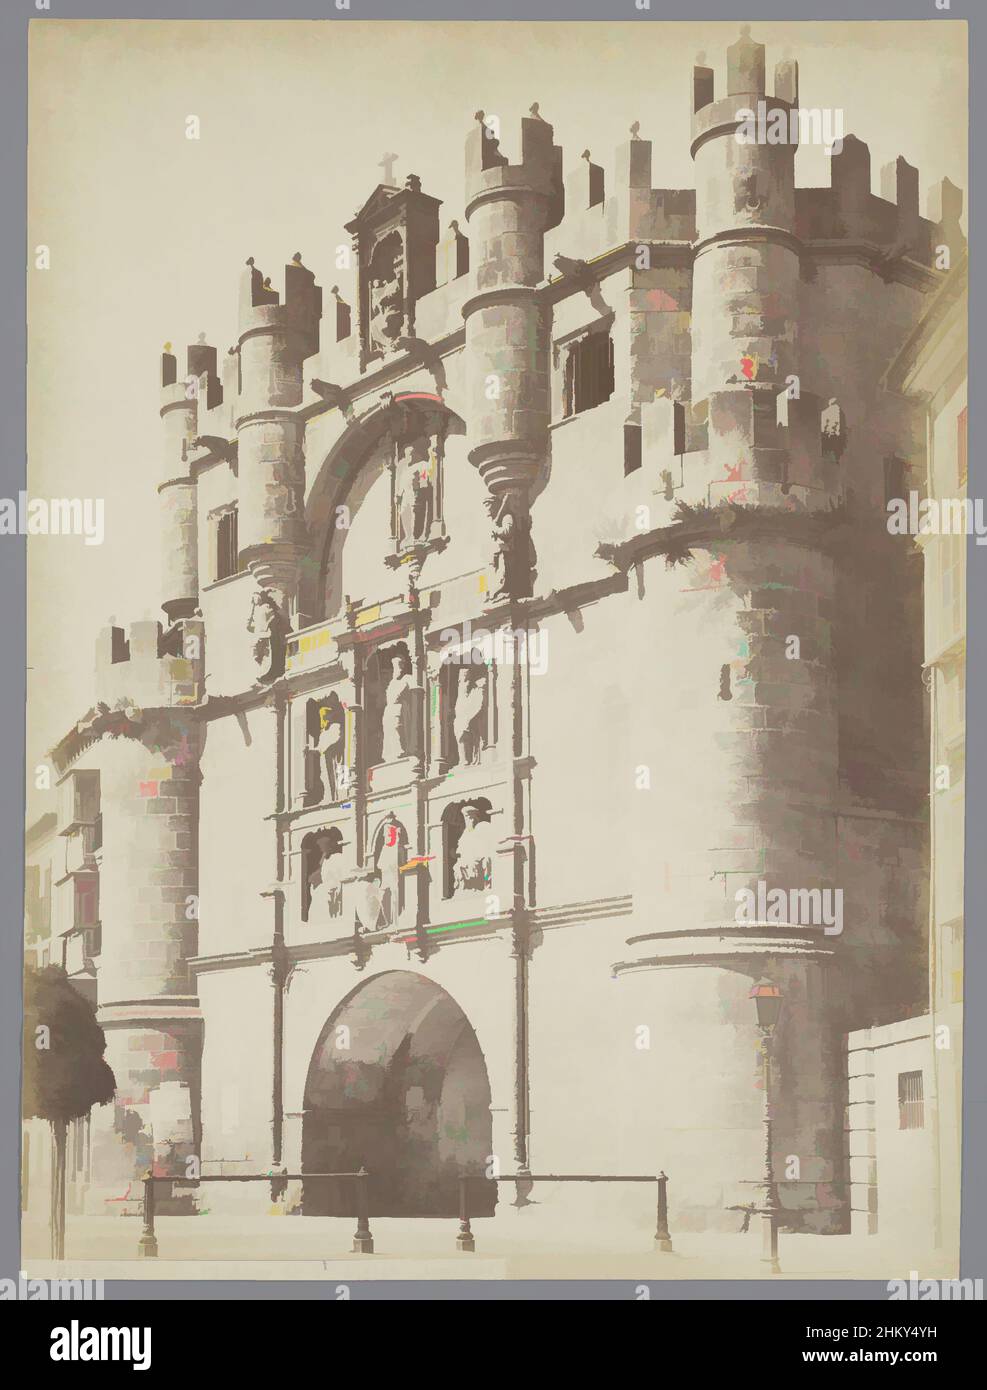 Art inspired by El Arco of the church Santa Maria in Burgos, Spain, El Arco of the church Santa Maria in Burgos, Spain., Juan Laurent, Madrid, c. 1850 - c. 1900, paper, albumen print, height 334 mm × width 249 mm, Classic works modernized by Artotop with a splash of modernity. Shapes, color and value, eye-catching visual impact on art. Emotions through freedom of artworks in a contemporary way. A timeless message pursuing a wildly creative new direction. Artists turning to the digital medium and creating the Artotop NFT Stock Photo